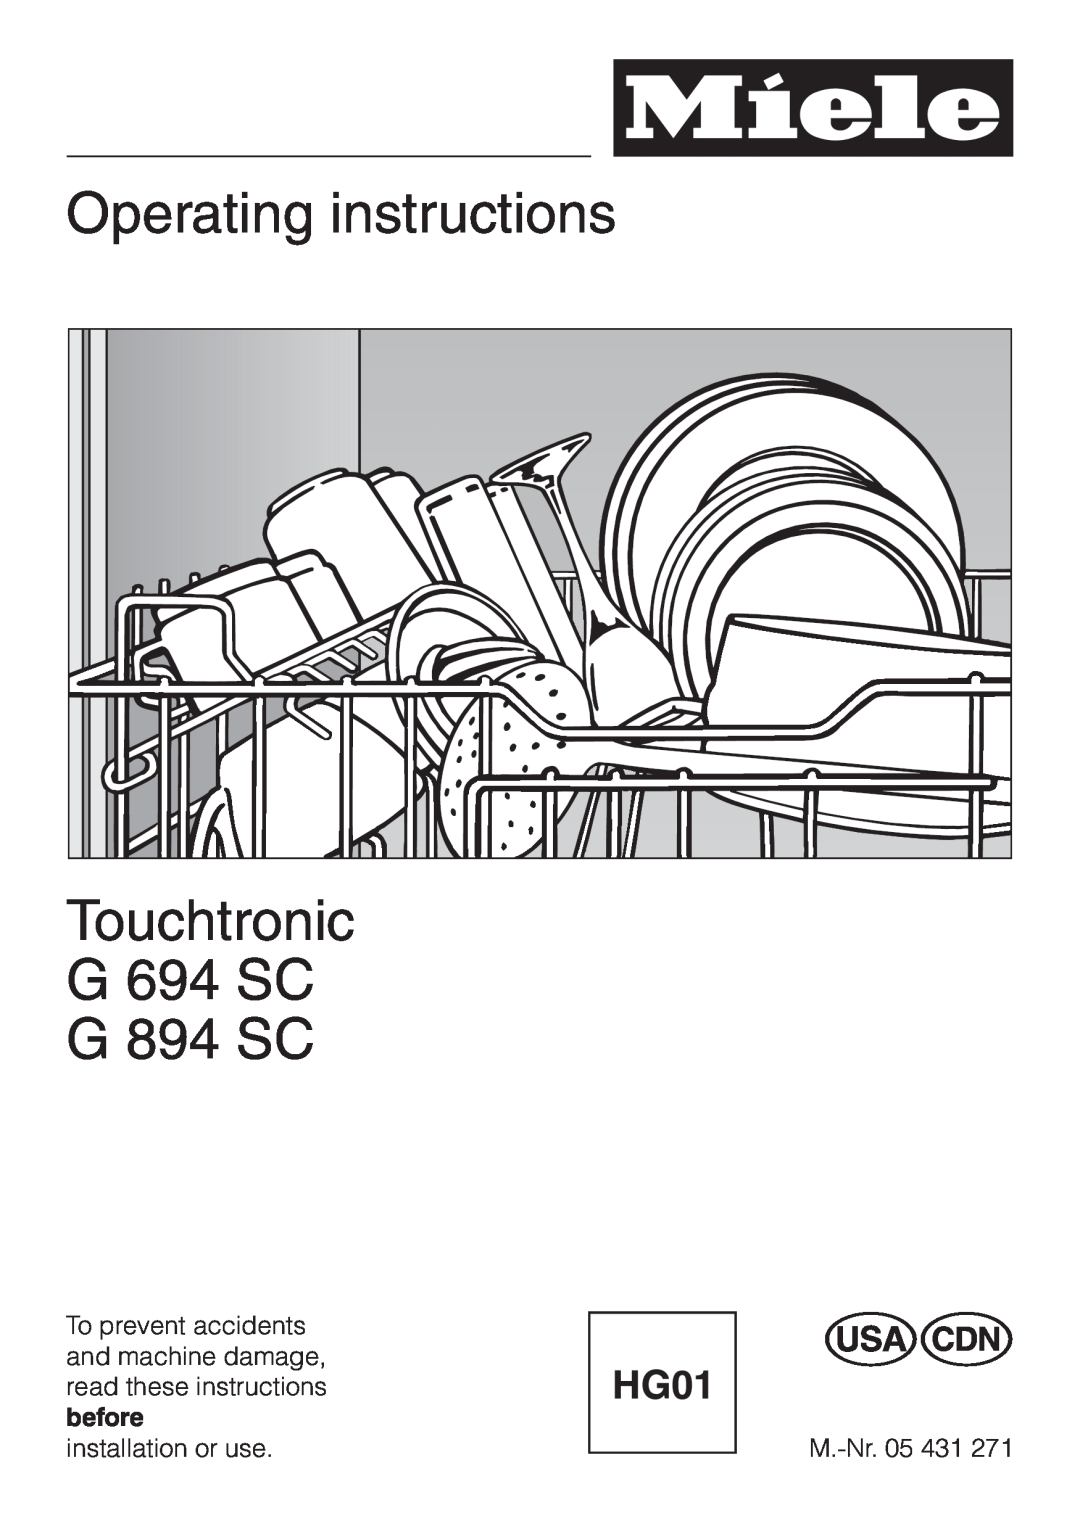 Miele G 694 SC manual Operating instructions, G 894 SC, Touchtronic 